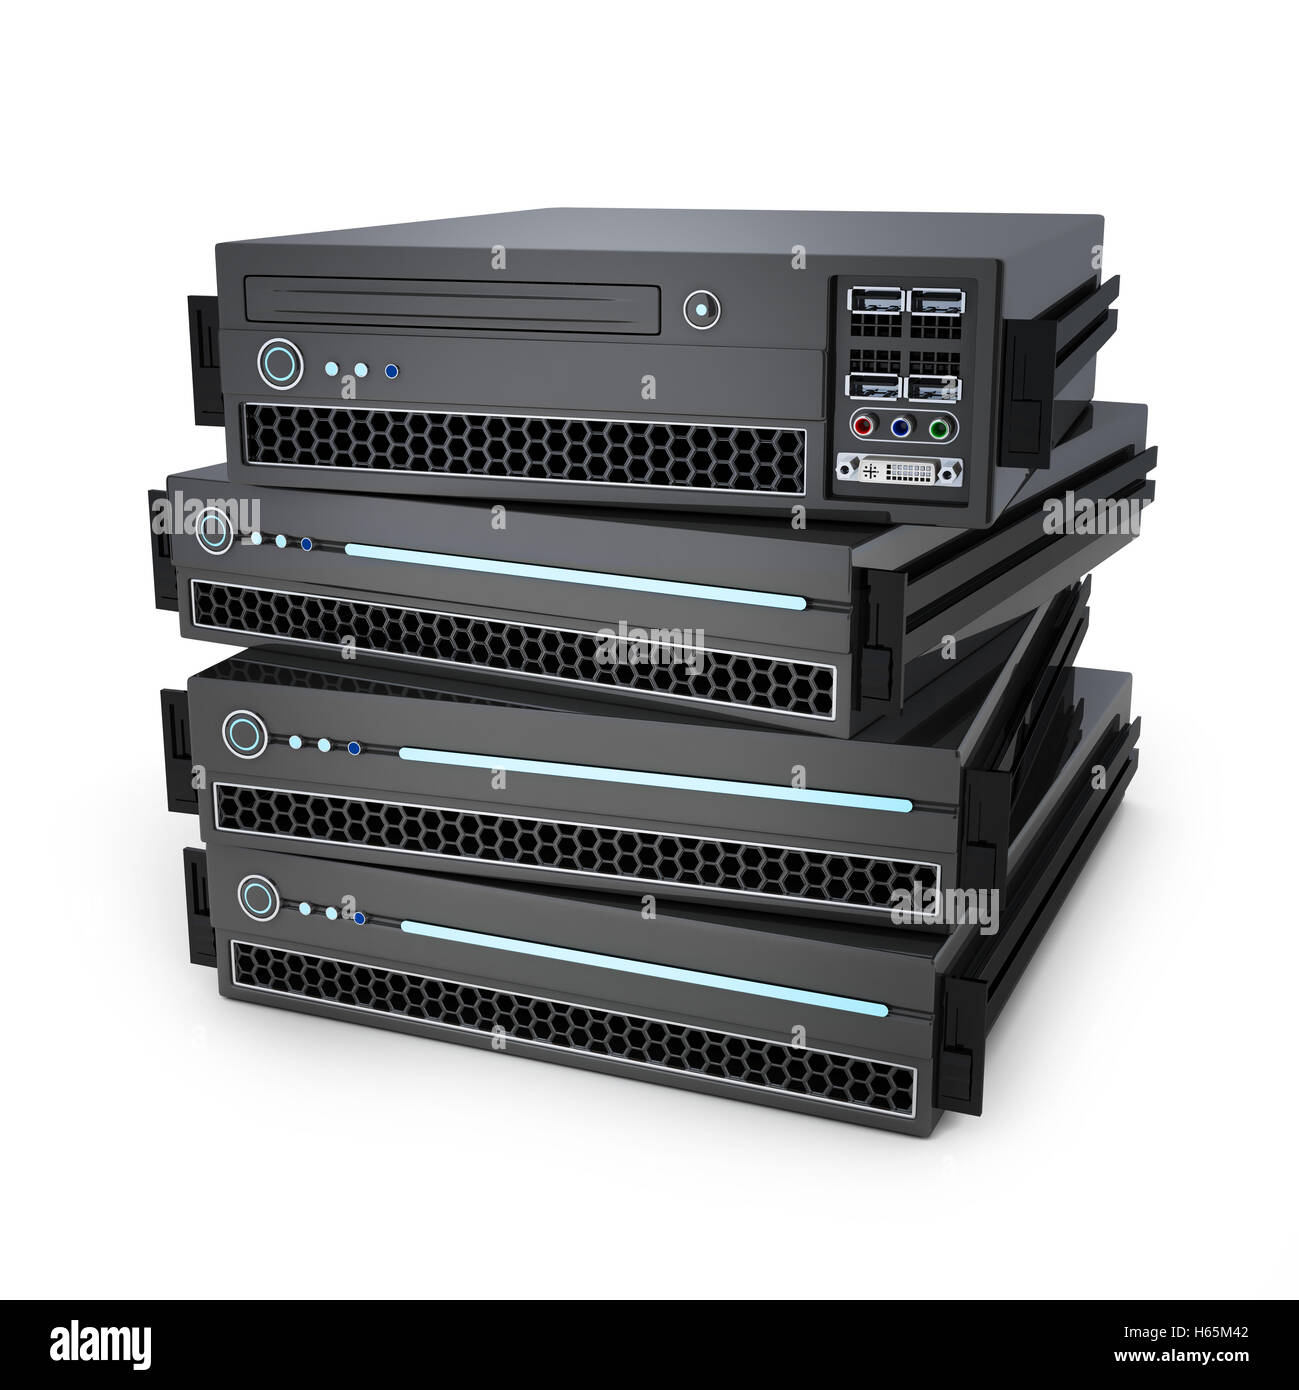 Four server unit (done in 3d rendering) Stock Photo